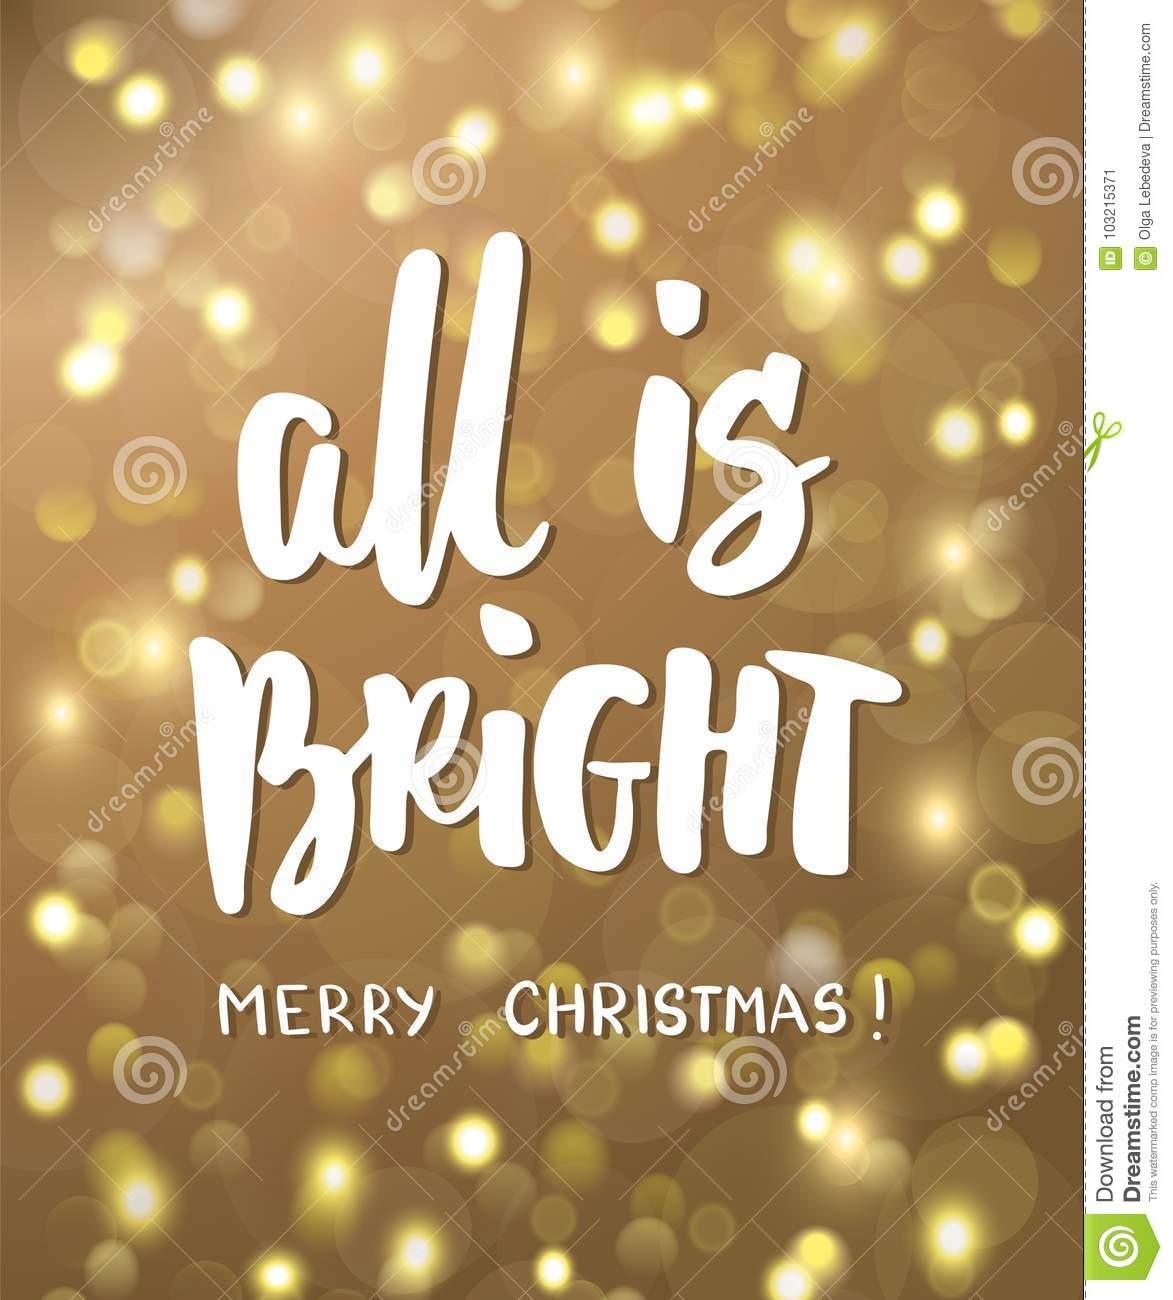 Christmas Light Quotes
 All Is Bright Merry Christmas Text Golden Glowing Lights